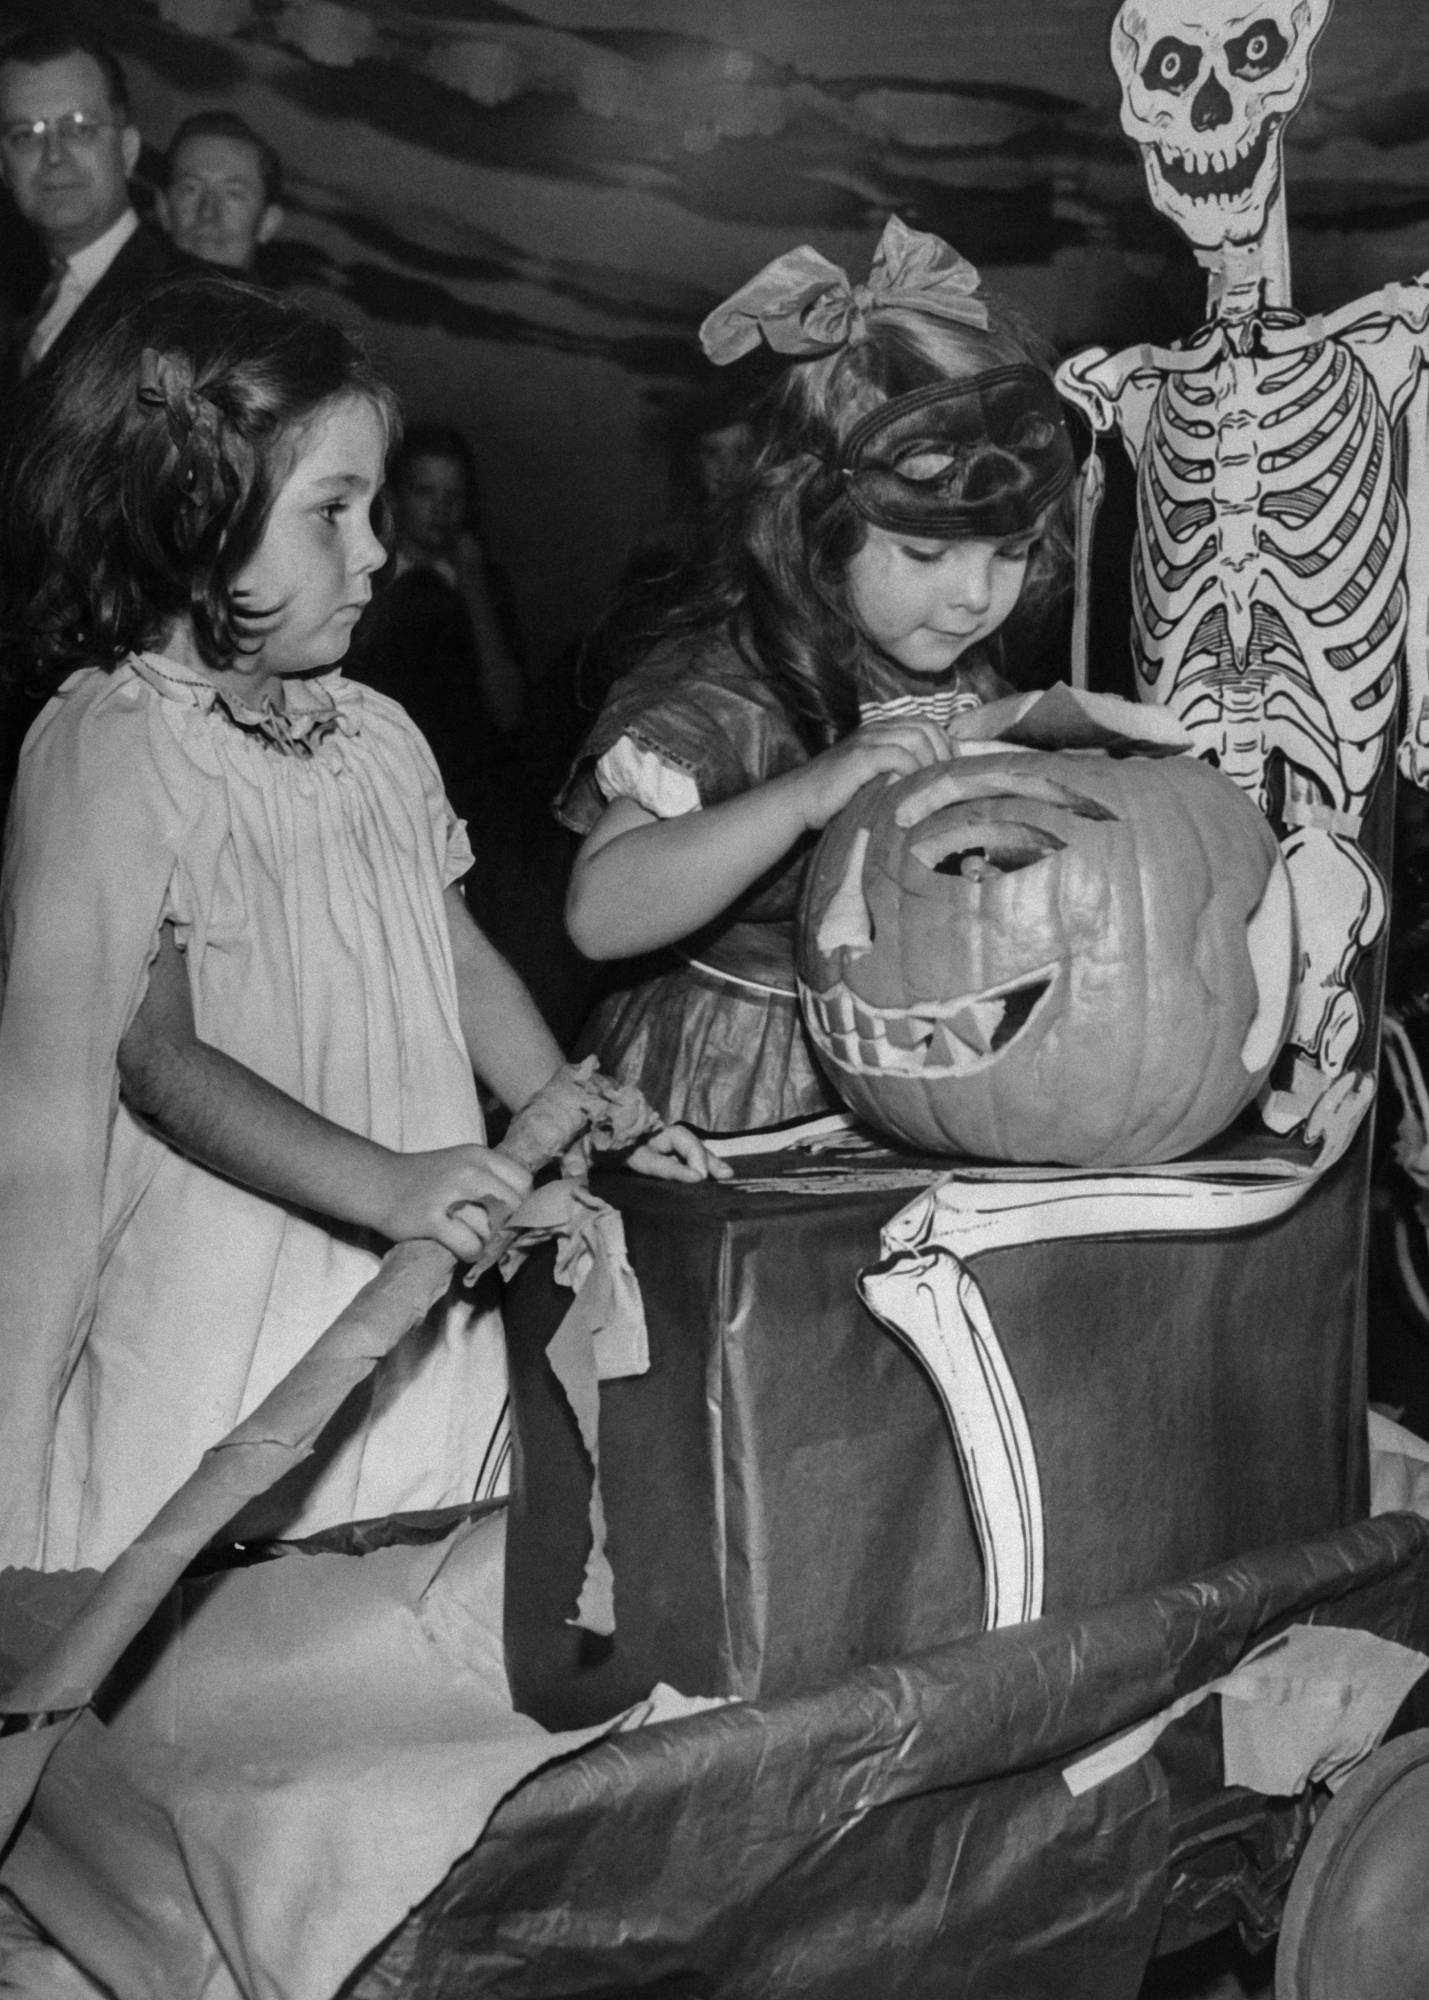 A black and white photo of two girls at an old halloween party with an uncomfortably detailed jack o' lantern. Its creepy, but I don't know why.